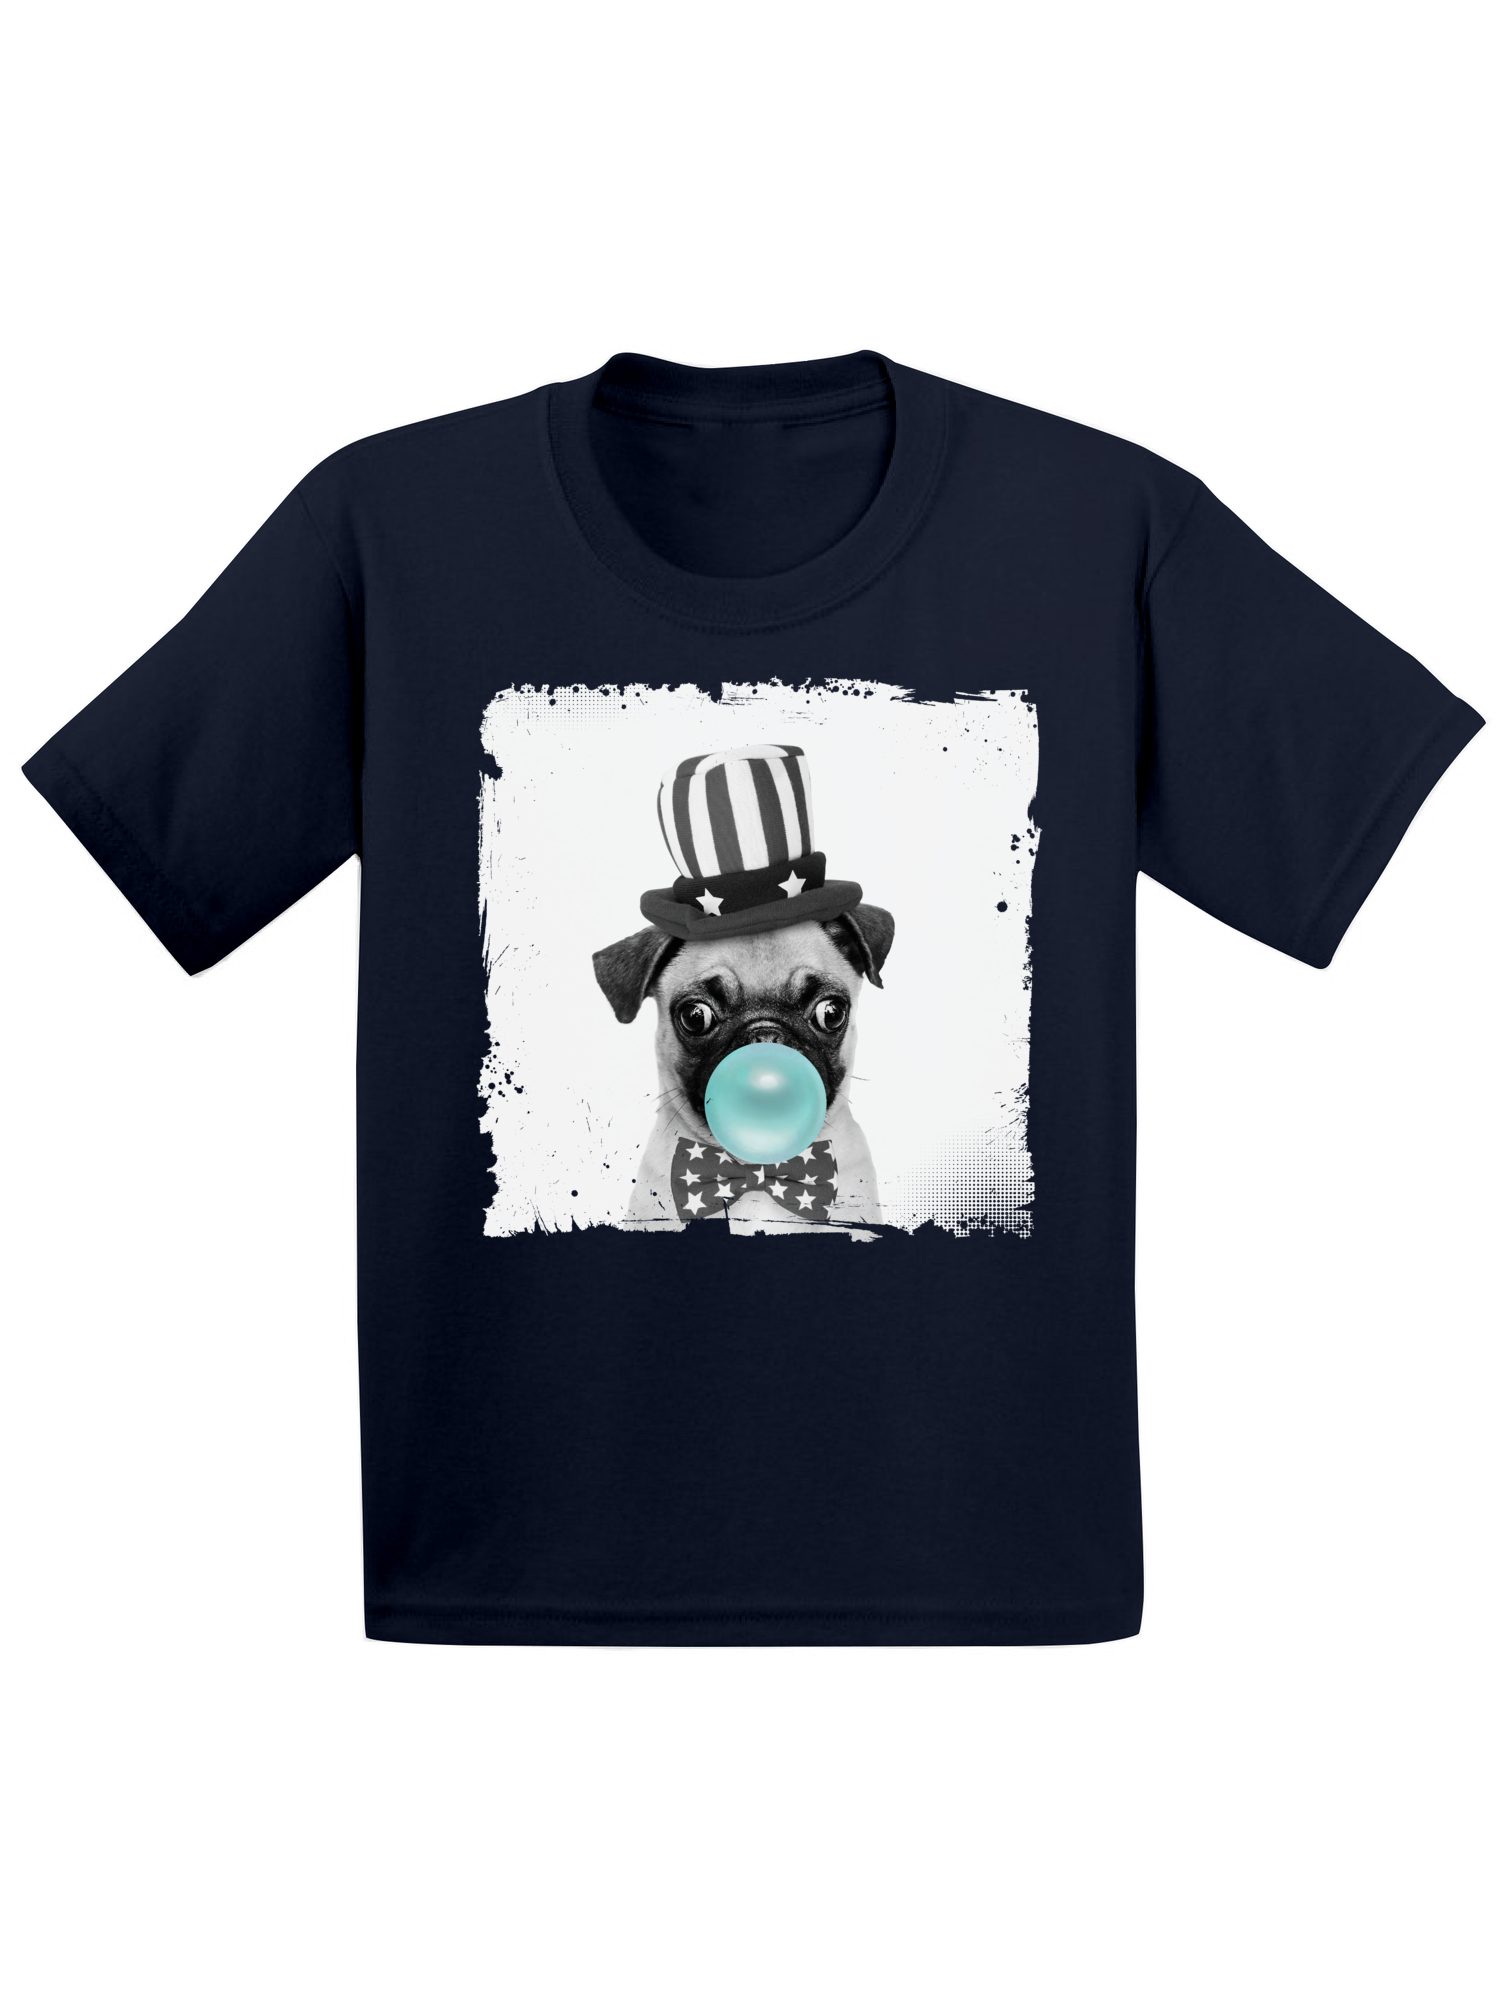 Awkward Styles Cute Pug Lovers Shirts Funny Gifts for Kids Childrens Outfit Puppy Pug Tshirt Pug Toddler Shirt Toddler T Shirt for Kids New Animal Collection Funny Pug with Gum Pug Clothing - image 1 of 4